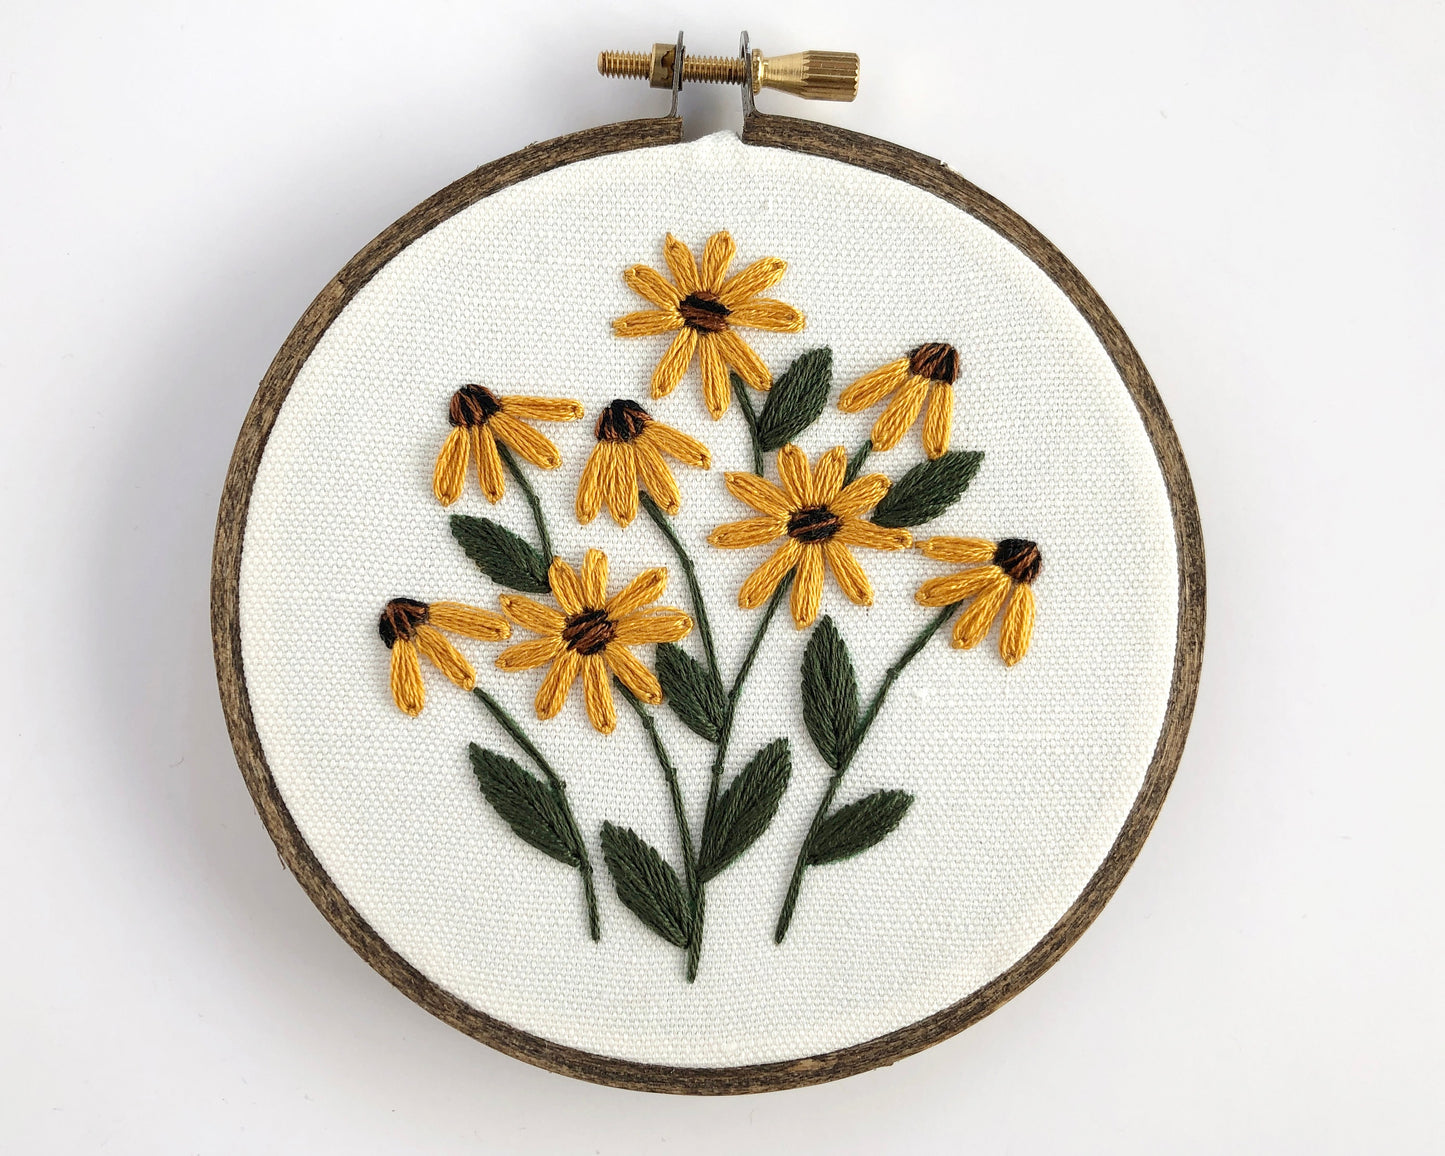 Mini Wildflower Kit, Embroidery Kit, DIY Craft, Botanical Embroidery, Beginner embroidery pattern, Wildflower Embroidery, Sunflower kit